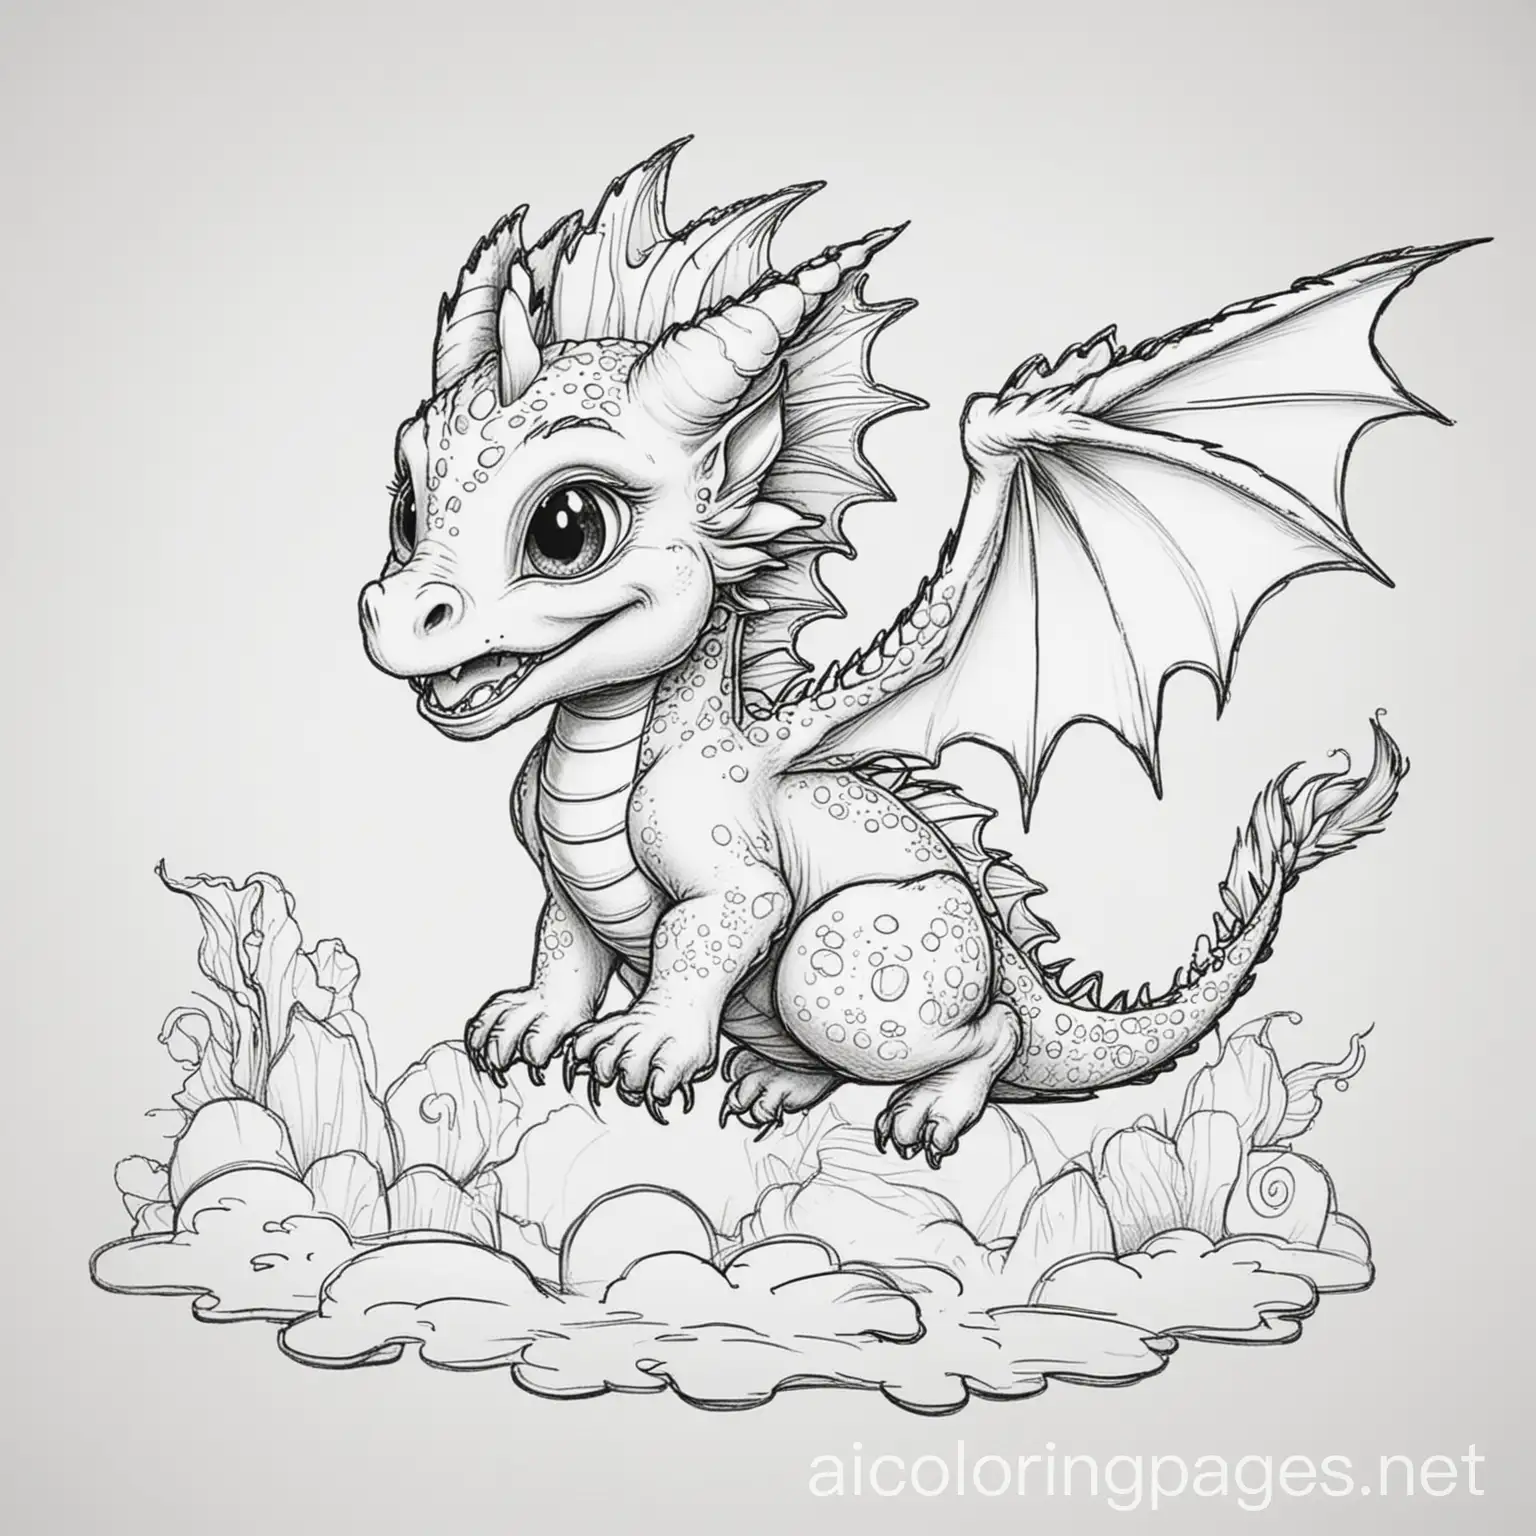 Baby dragon flyingnHigh detailnAdult coloring book, Coloring Page, black and white, line art, white background, Simplicity, Ample White Space. The background of the coloring page is plain white to make it easy for young children to color within the lines. The outlines of all the subjects are easy to distinguish, making it simple for kids to color without too much difficulty